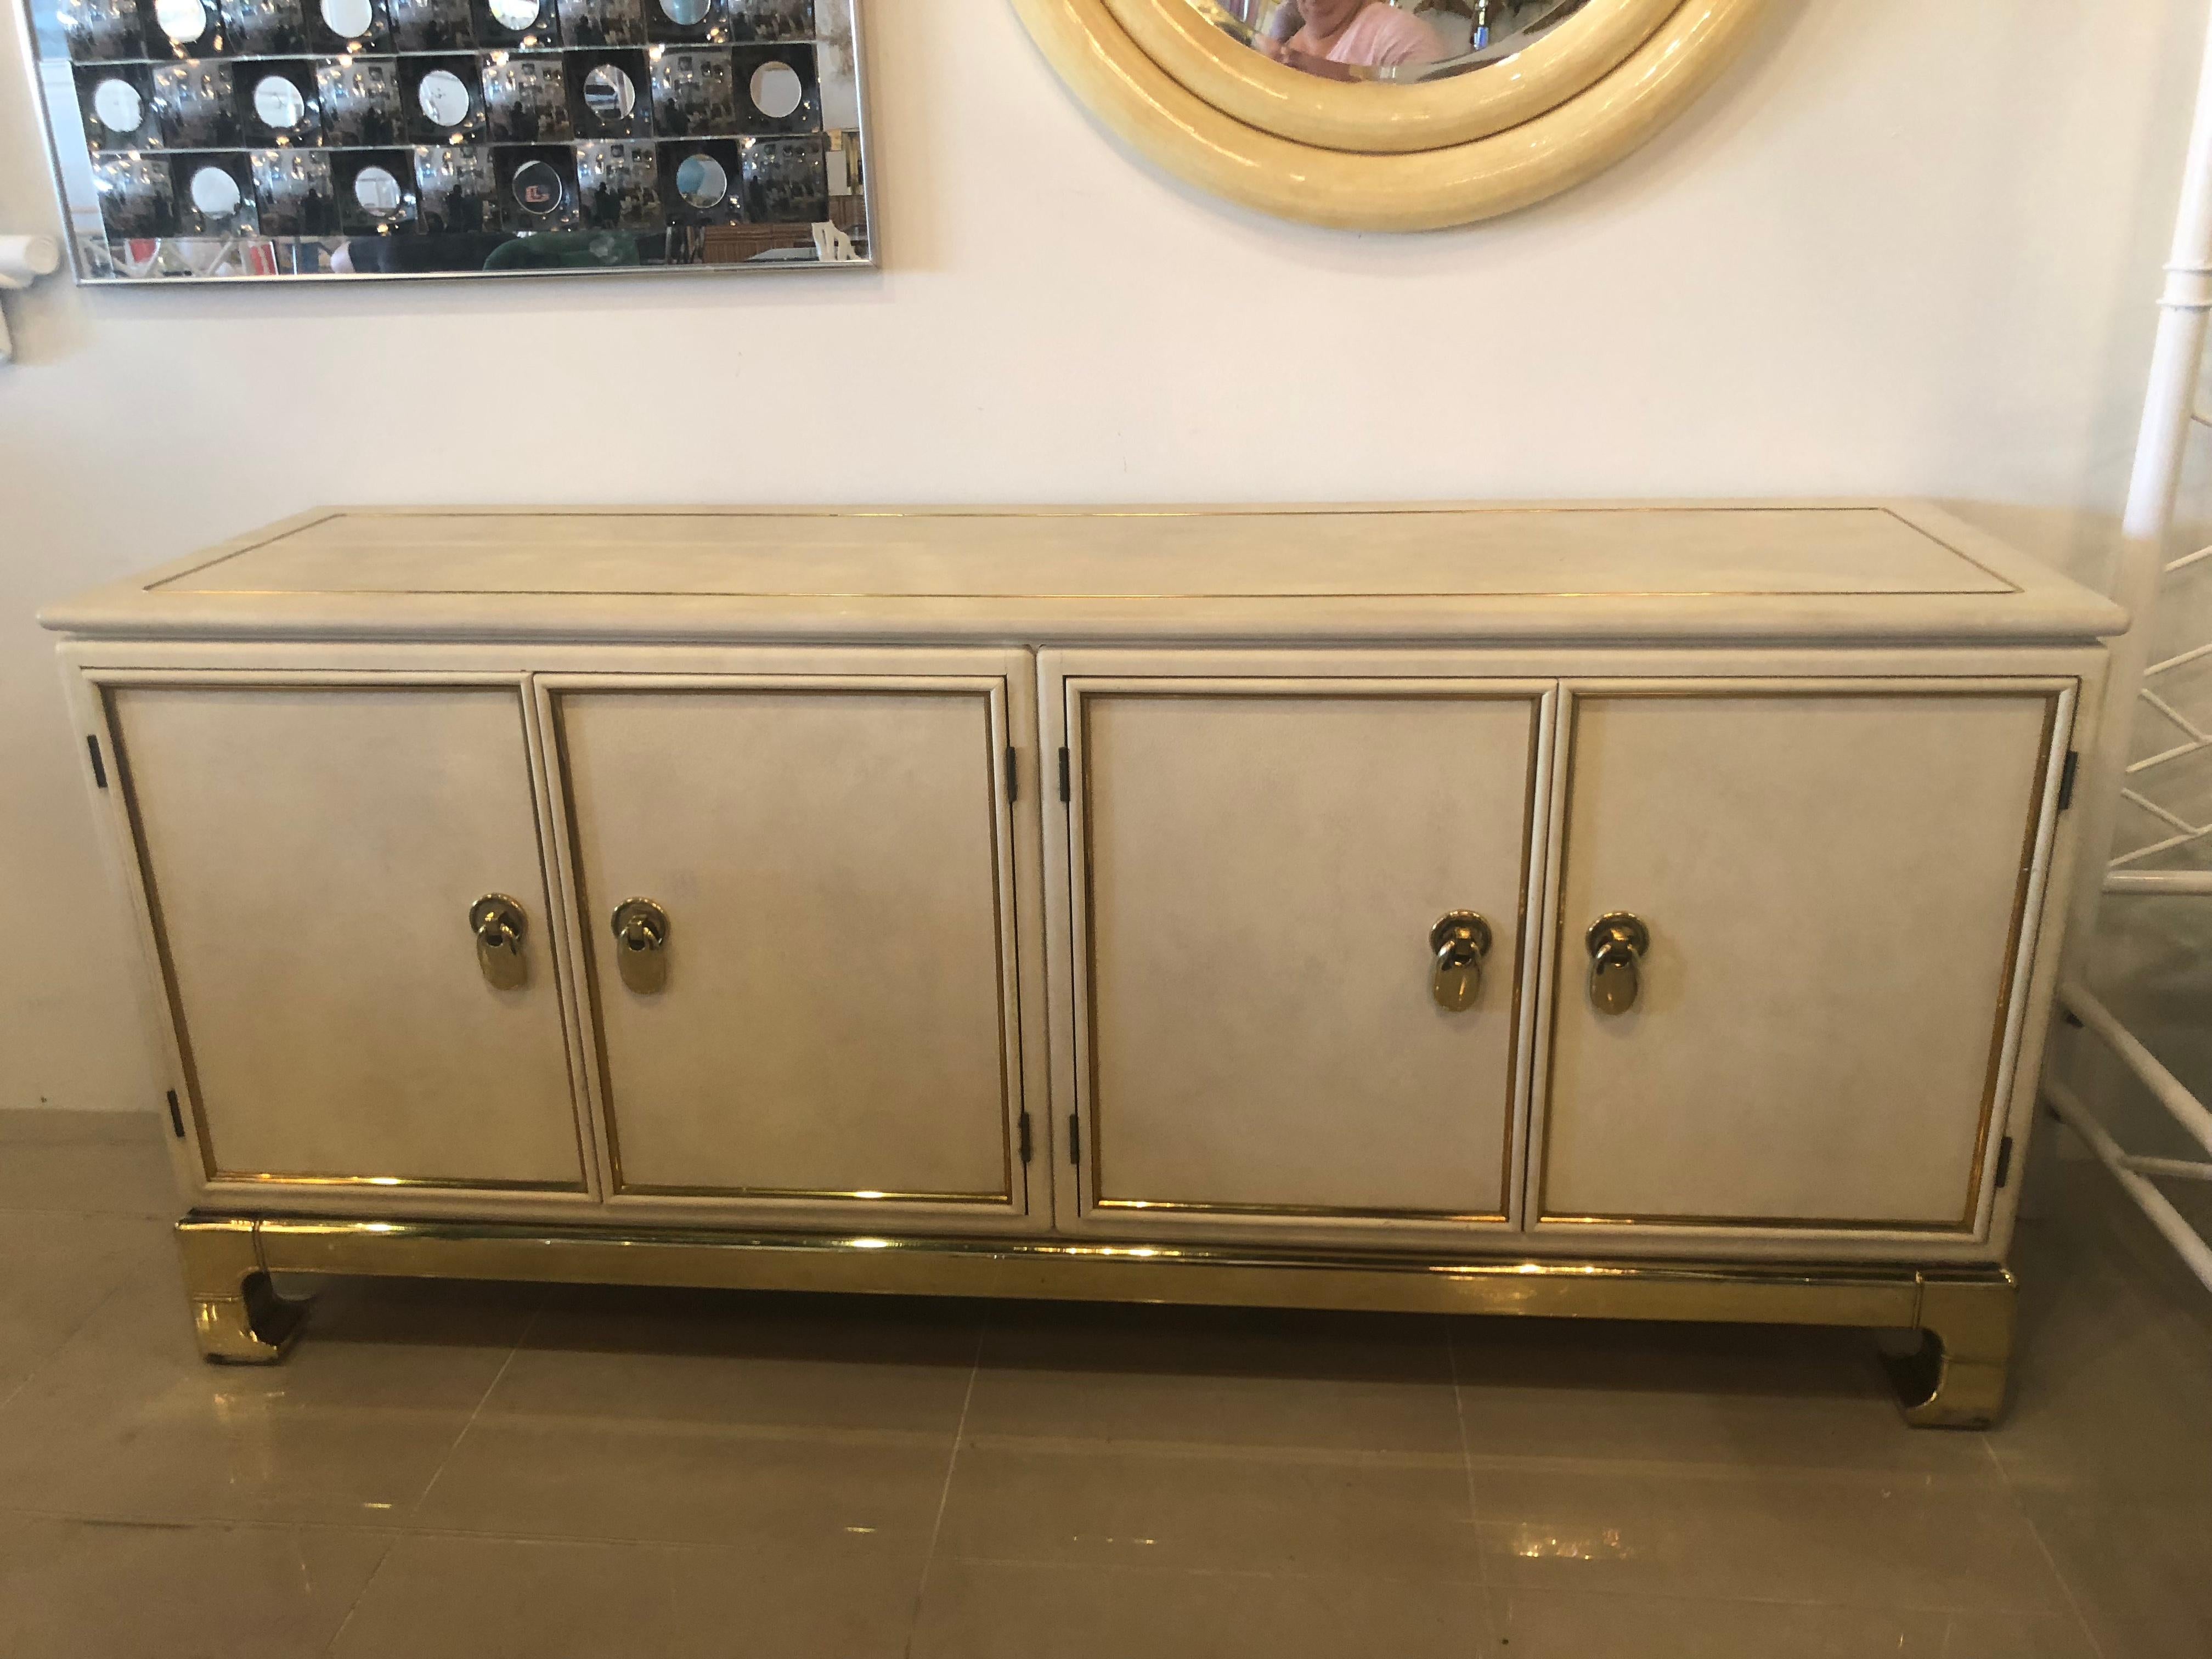 Vintage Mastercraft credenza, tagged on the back (pictured). Double doors on each side with shelf on each side, one side has a drawer also (pictured). Brass finish does have some discoloration (pictured). The inside of the cabinet does have scuffs